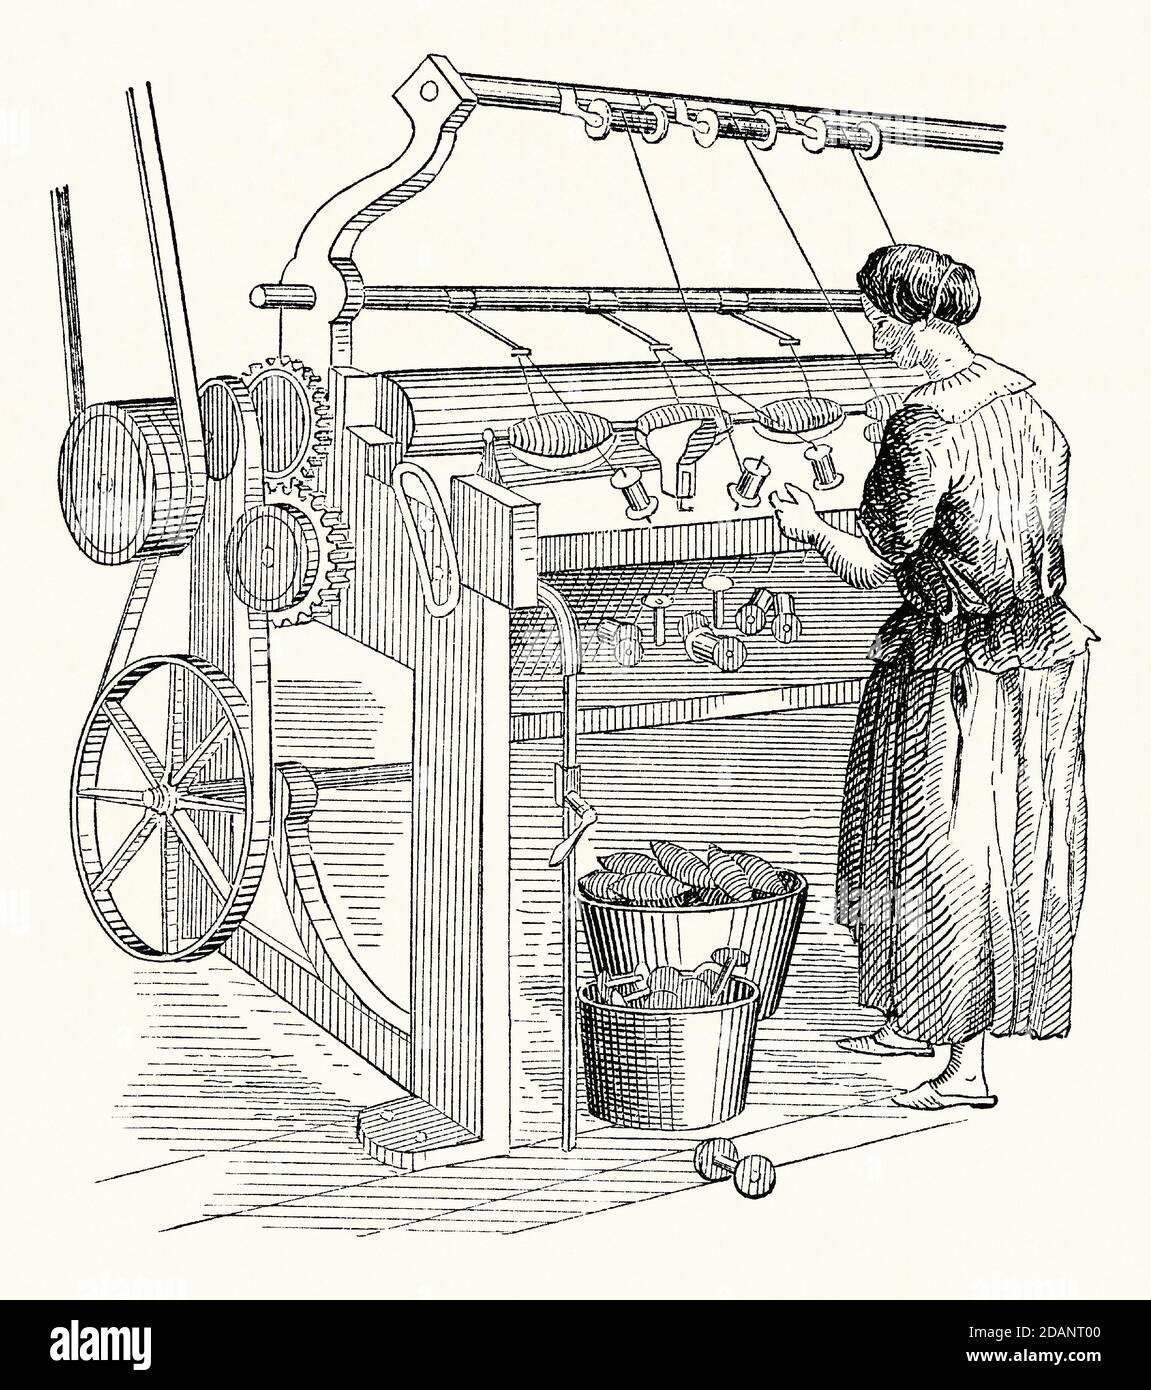 An old engraving of woman working at a yarn-gassing machine in a textile or cloth mill. It is from a Victorian mechanical engineering book of the 1880s. In textile manufacturing, gassing is the process of passing newly spun yarn quickly through a flame to remove the loose fibre ends. Boxes of the thread on spindles are seen below the belt-operated machinery, along with the wooden yarn spools. Stock Photo